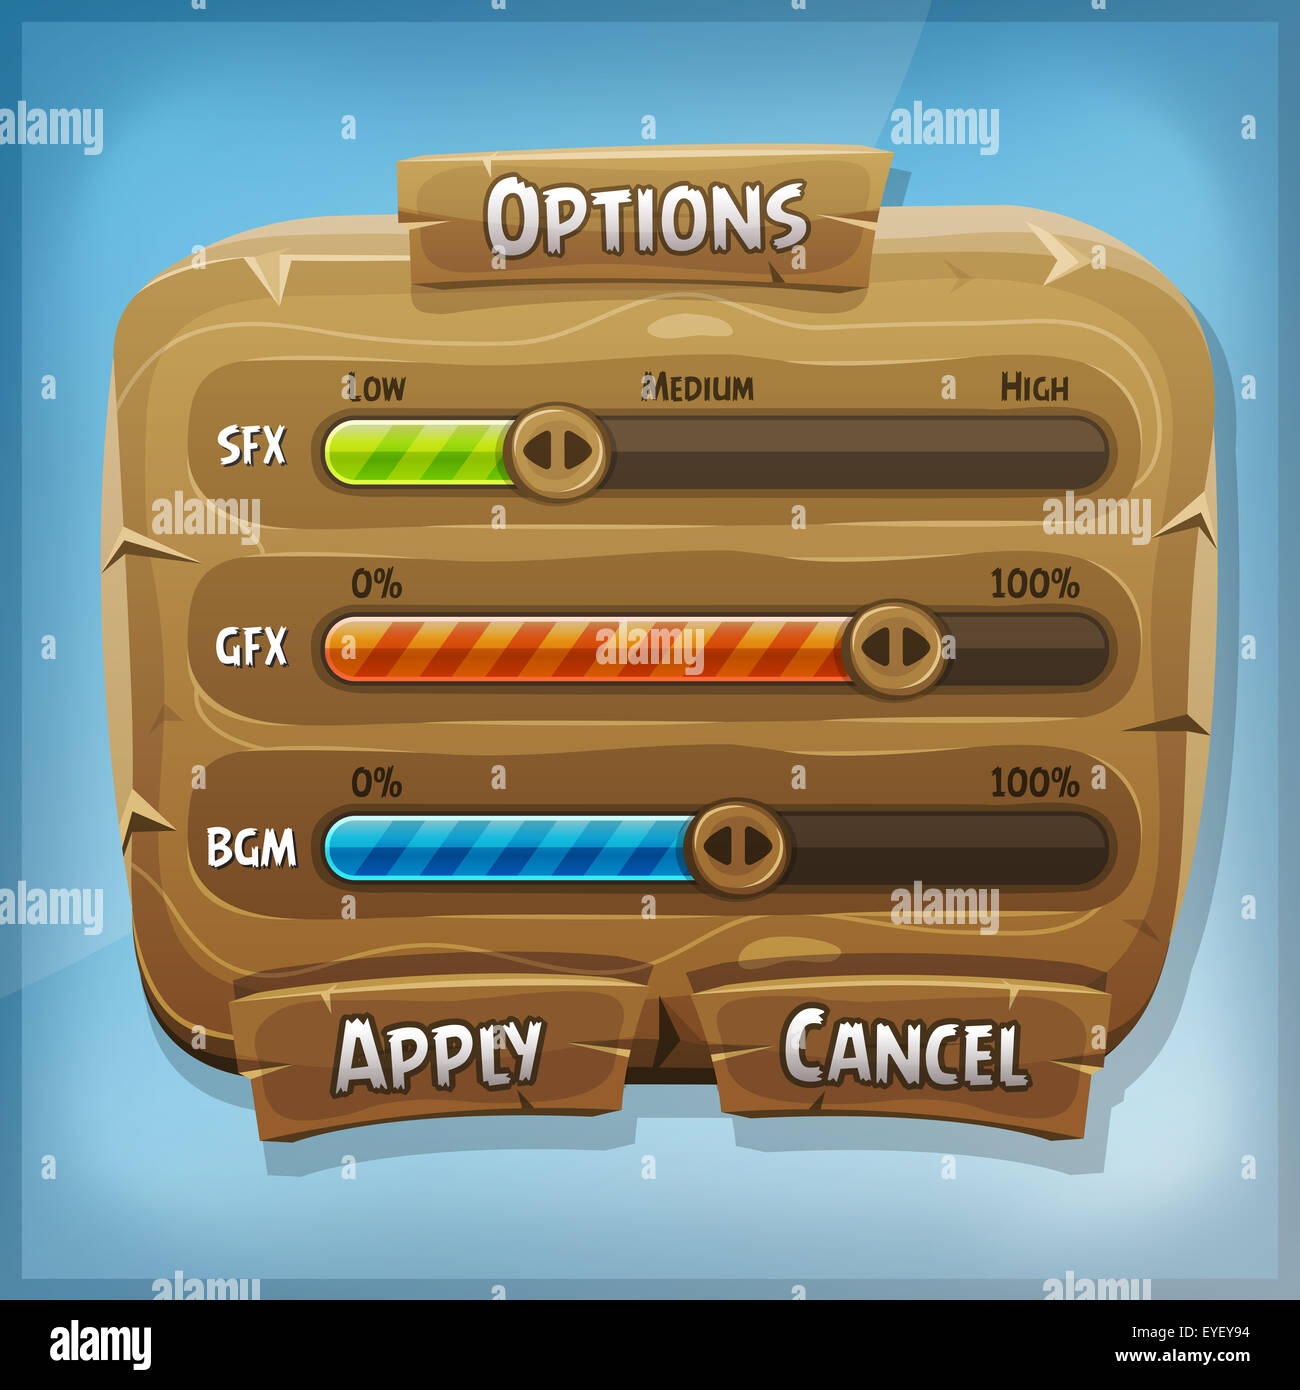 Illustration Of A Funny Cartoon Design Ui Game Wooden Options Control Panel Including Status And Level Bars For App Settings On Stock Photo Alamy